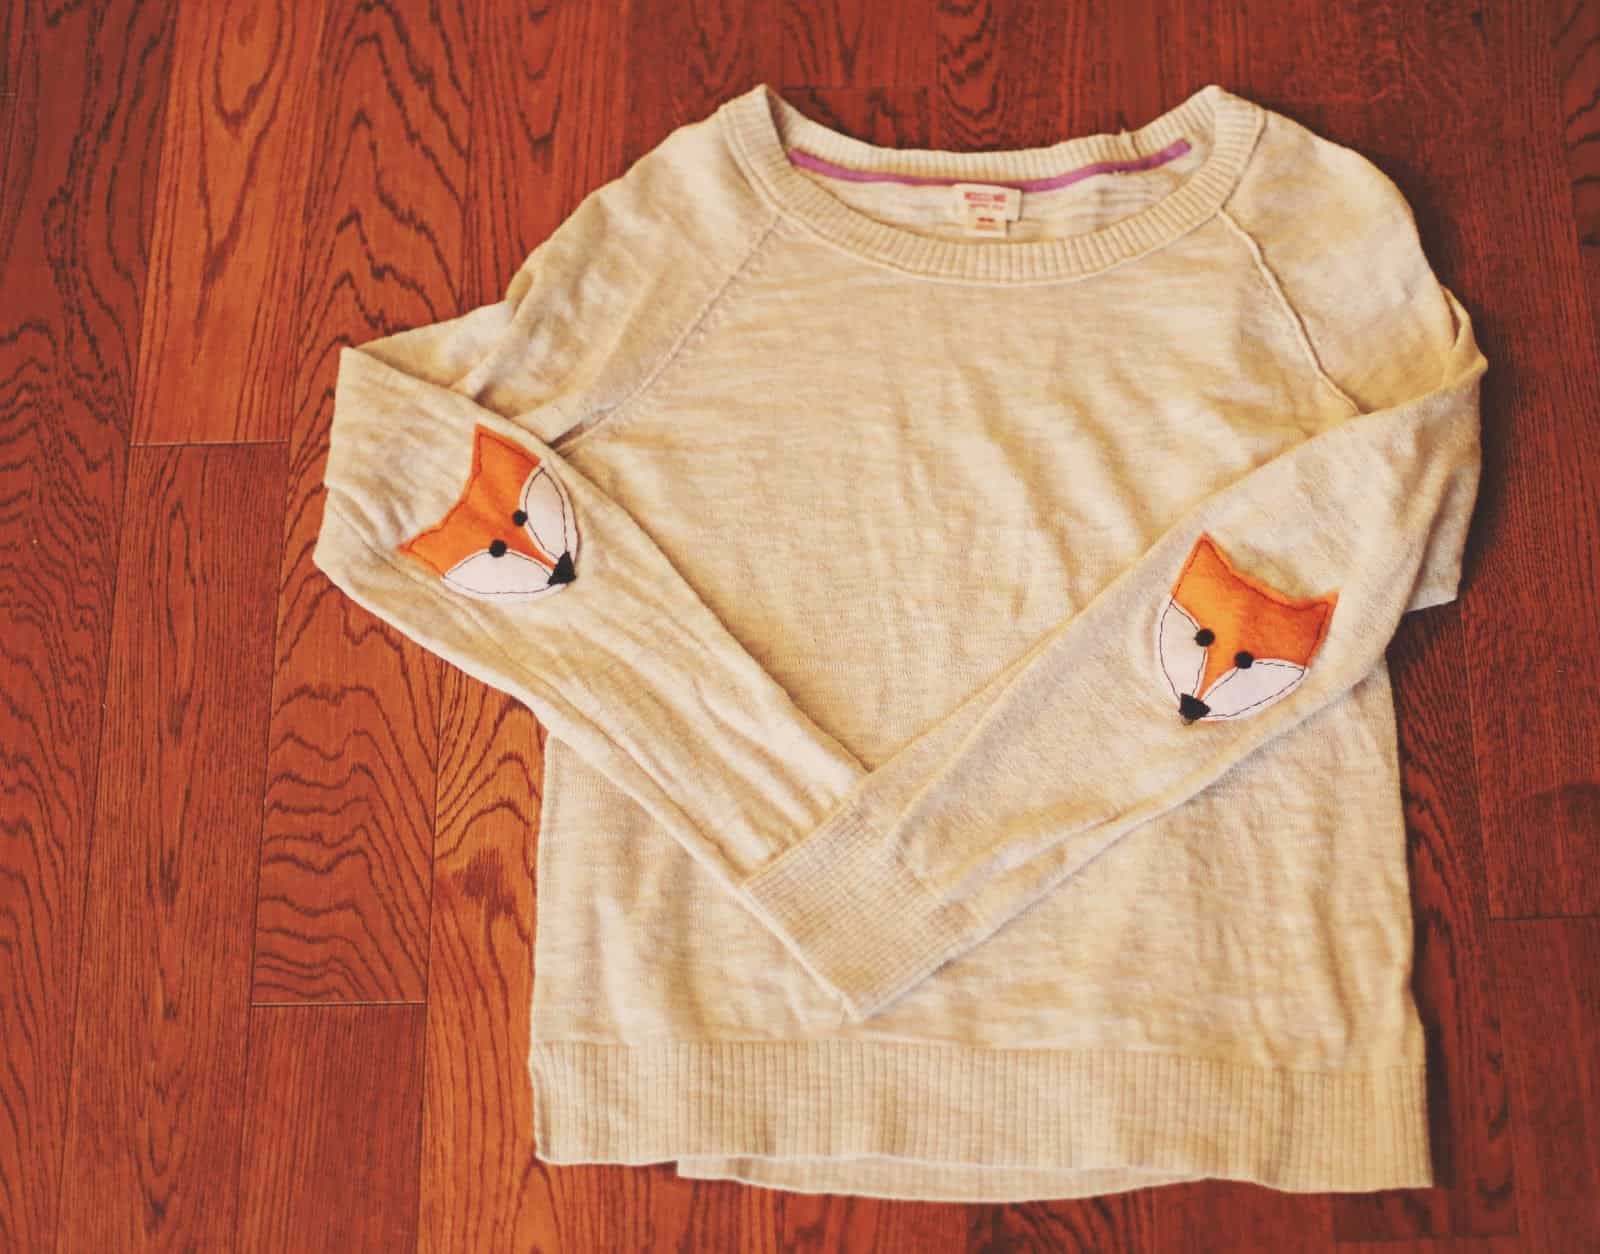 Fox elbow patches